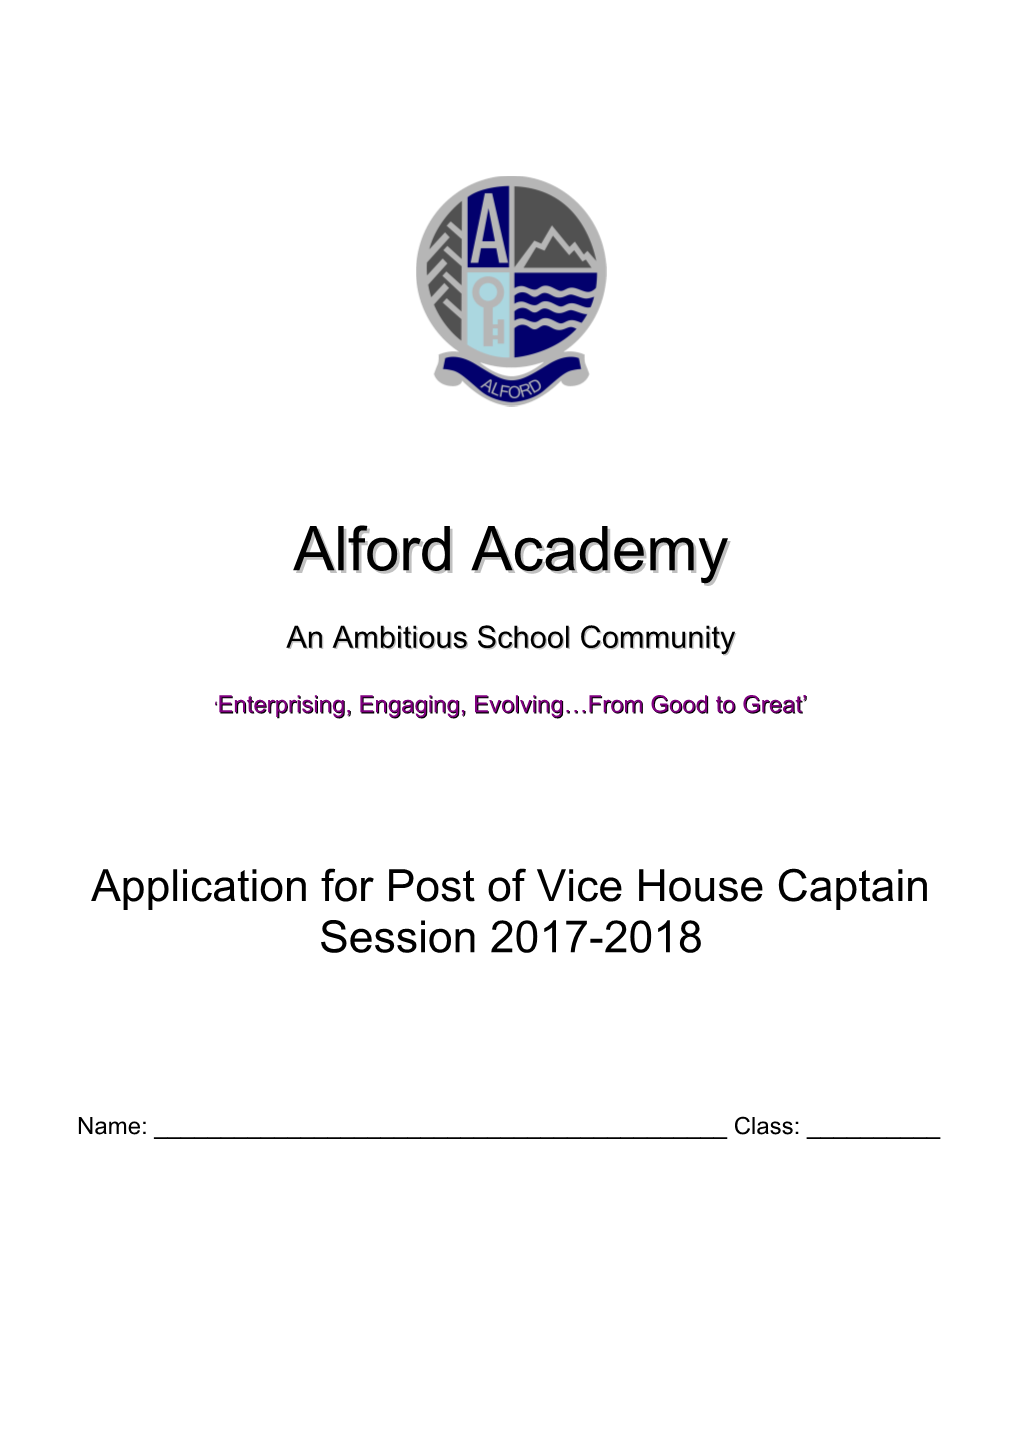 Application for Post of Vice House Captain